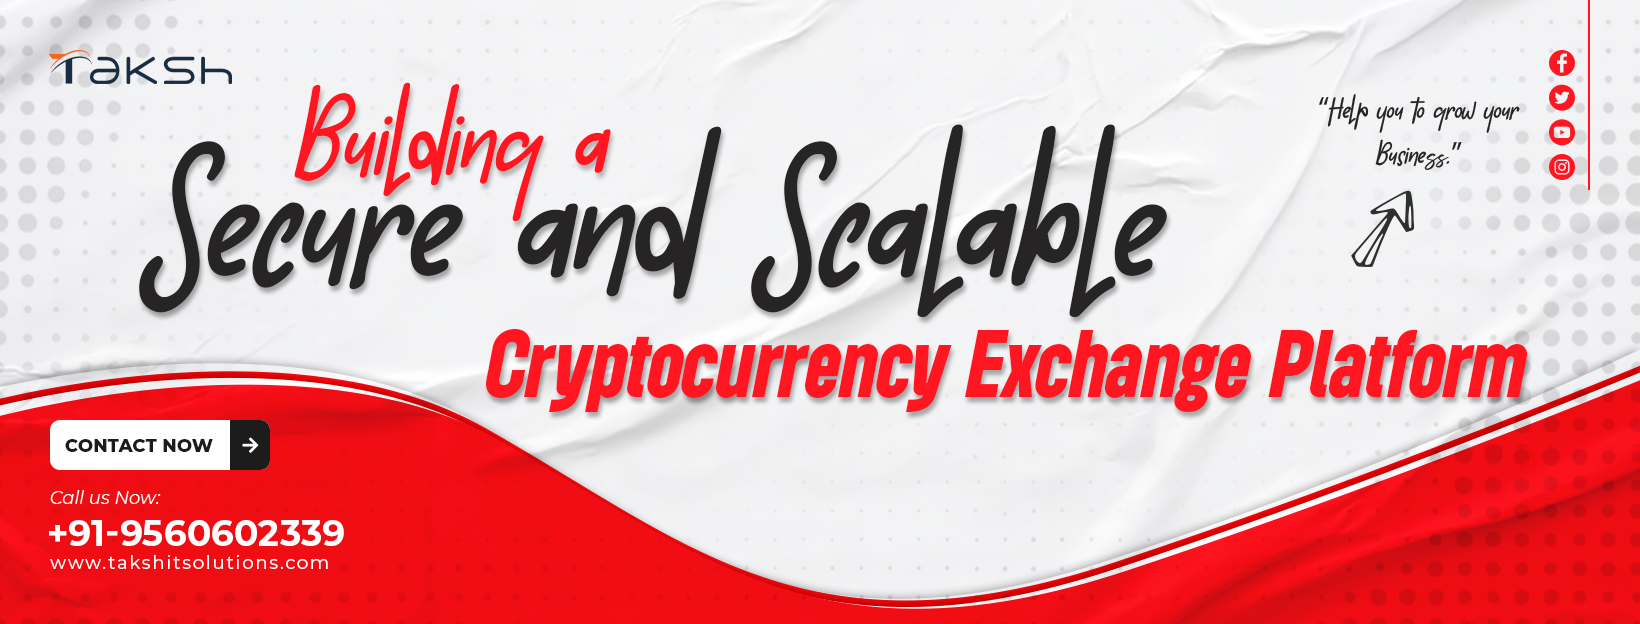  From Idea to Reality: Building a Secure and Scalable Cryptocurrency Exchange Platform